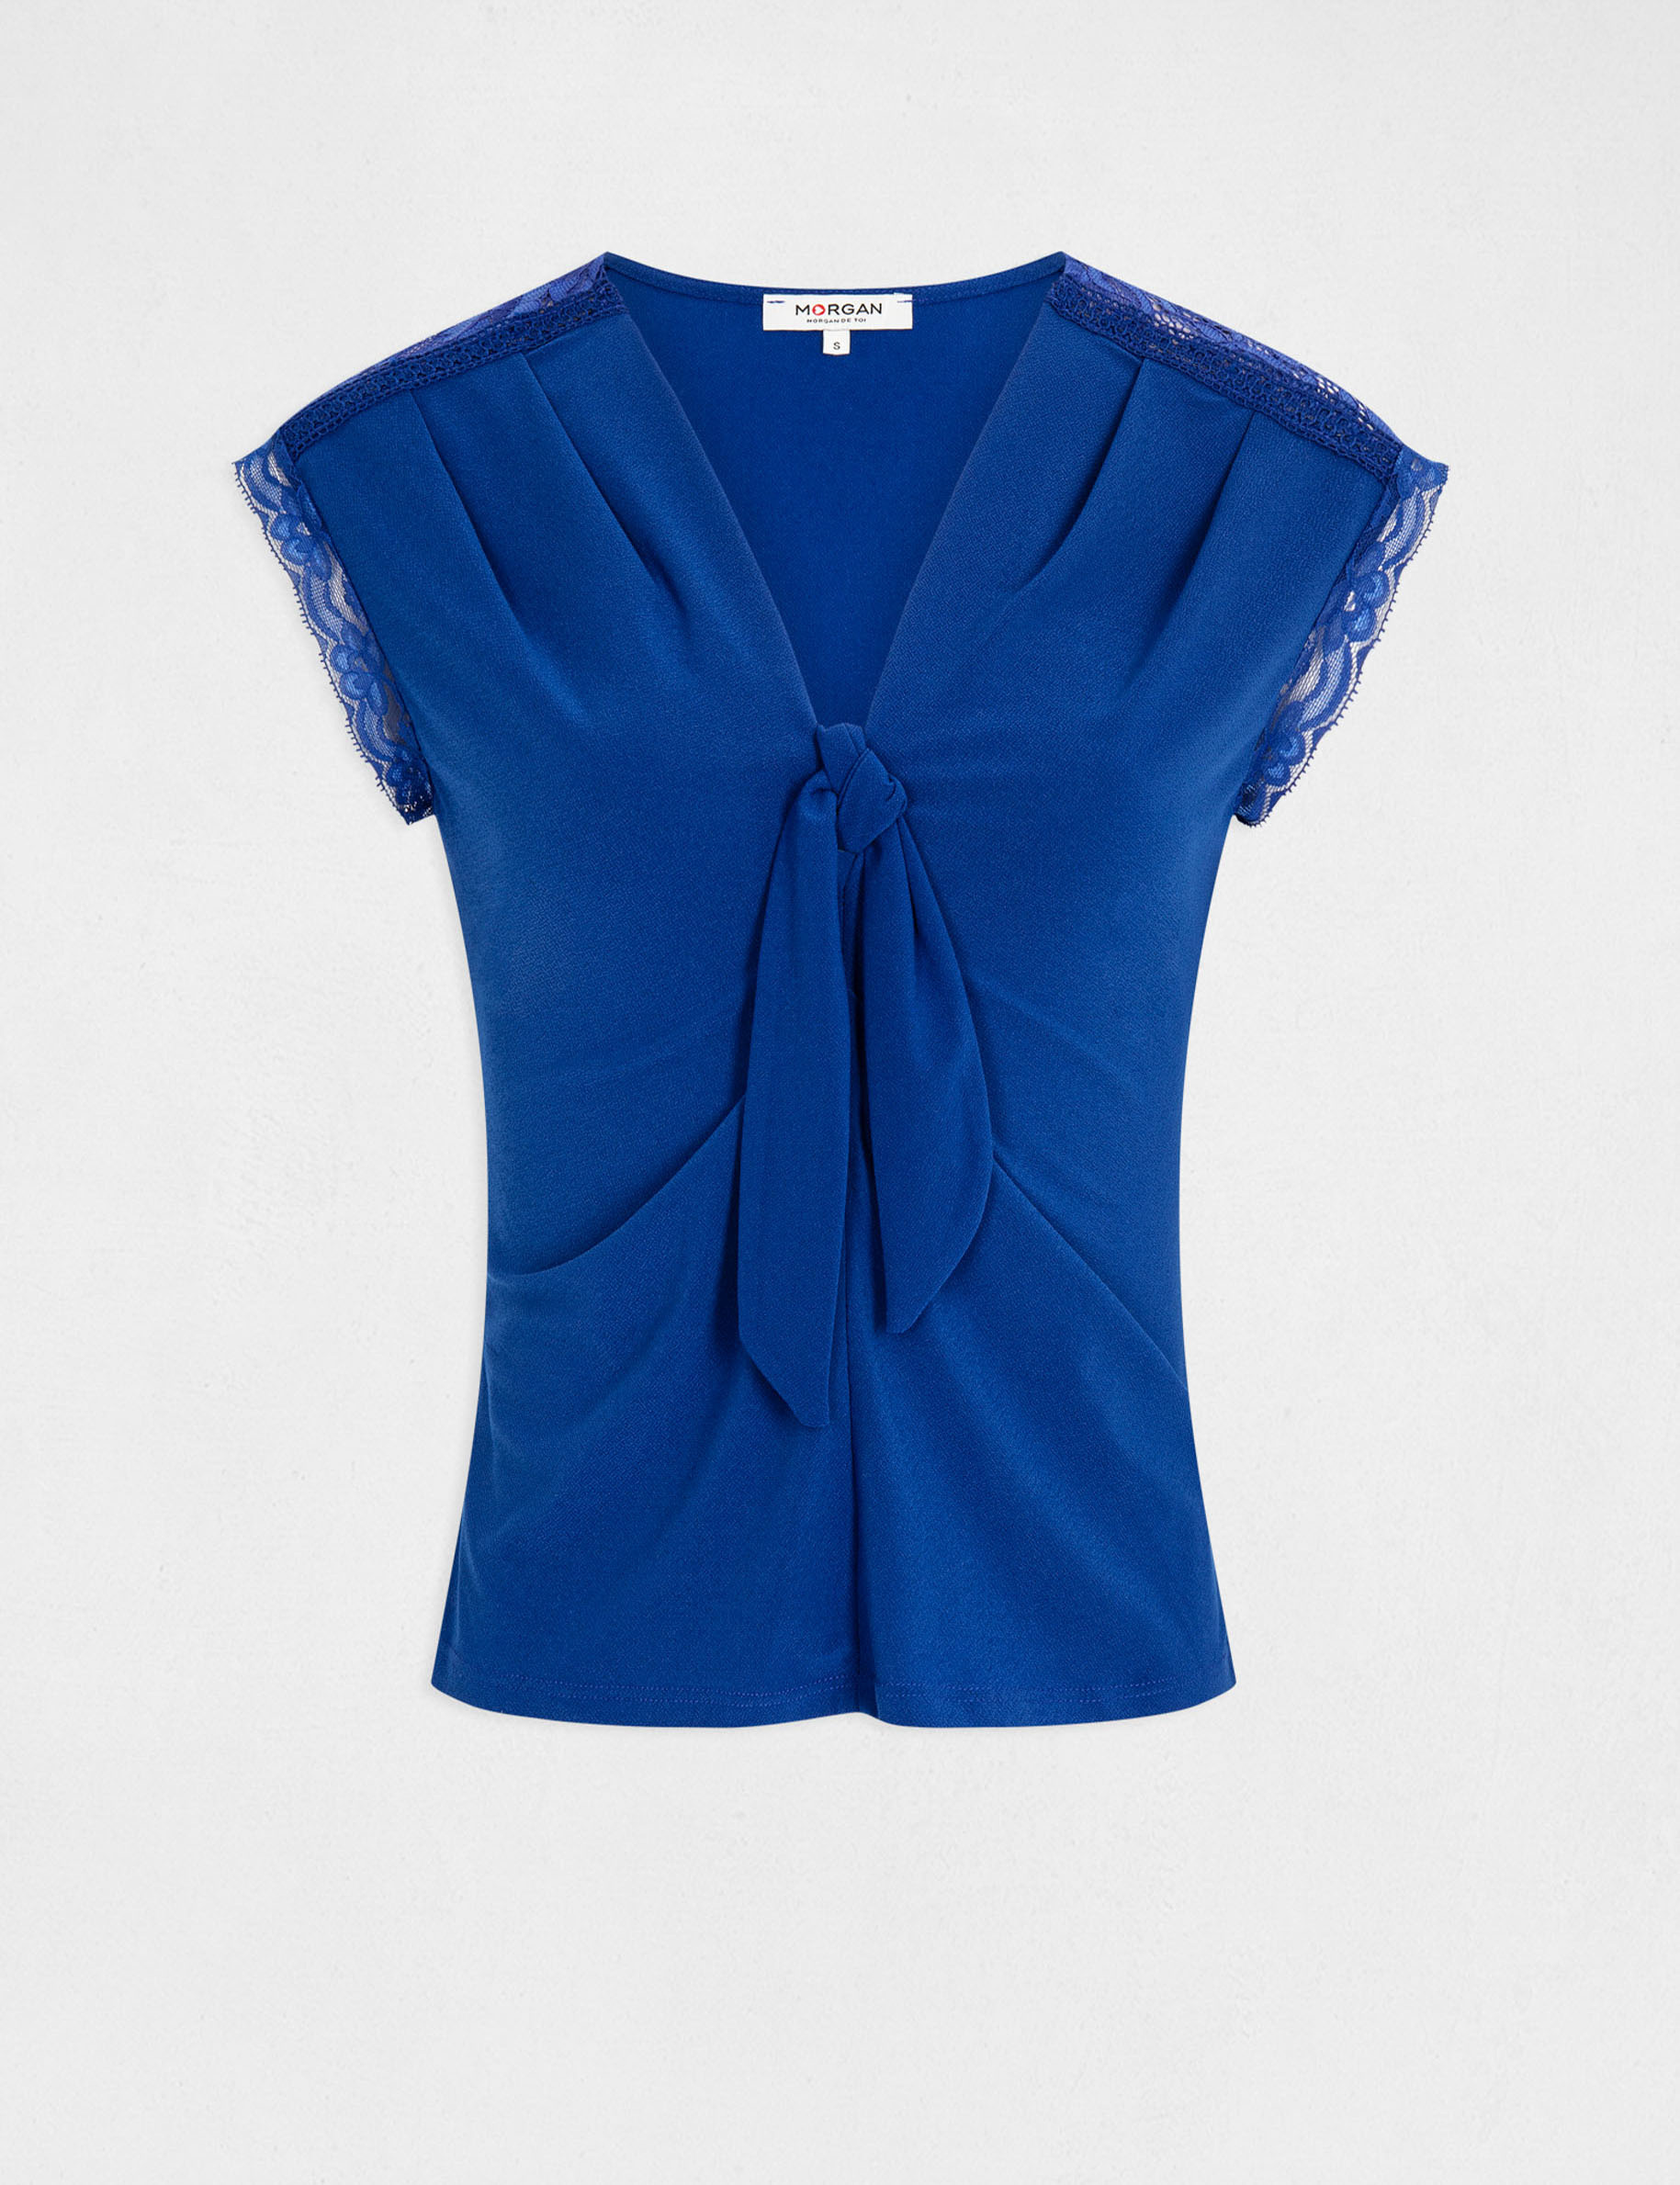 Short-sleeved t-shirt with bow electric blue ladies'